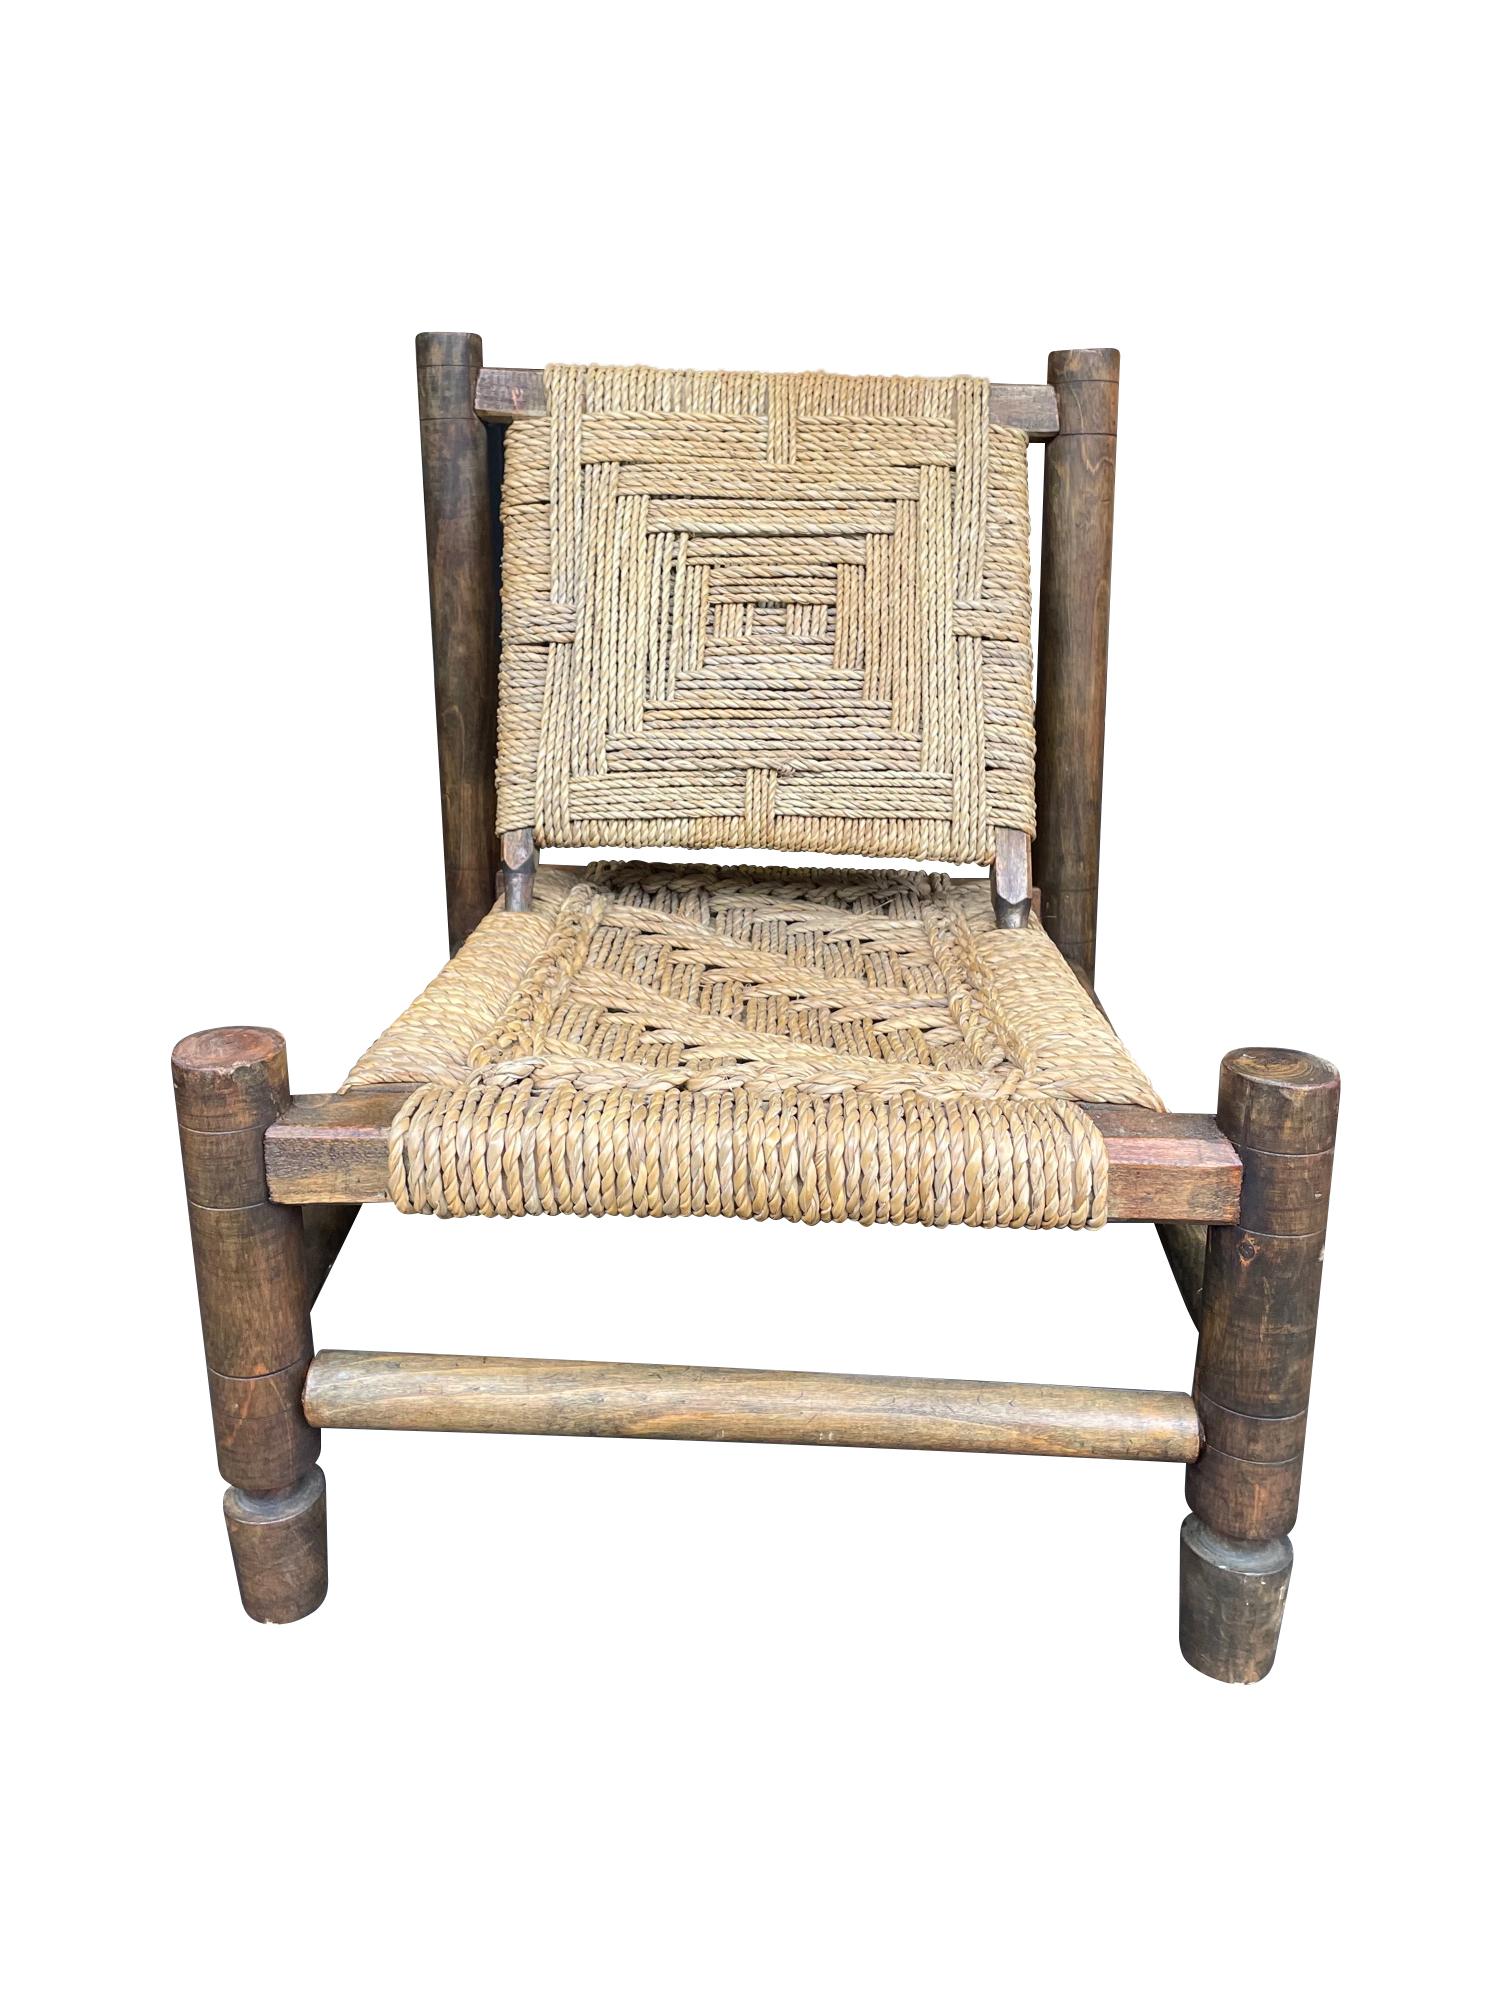 A lovely 1950s rustic French Rope and wood chair by Adrien Audoux and Frida Minet, with hand woven rope seat and back in a geometric pattern on a stained hand turned wooden frame. 

Adrien Audoux and Frida Minet designed rustic style furniture